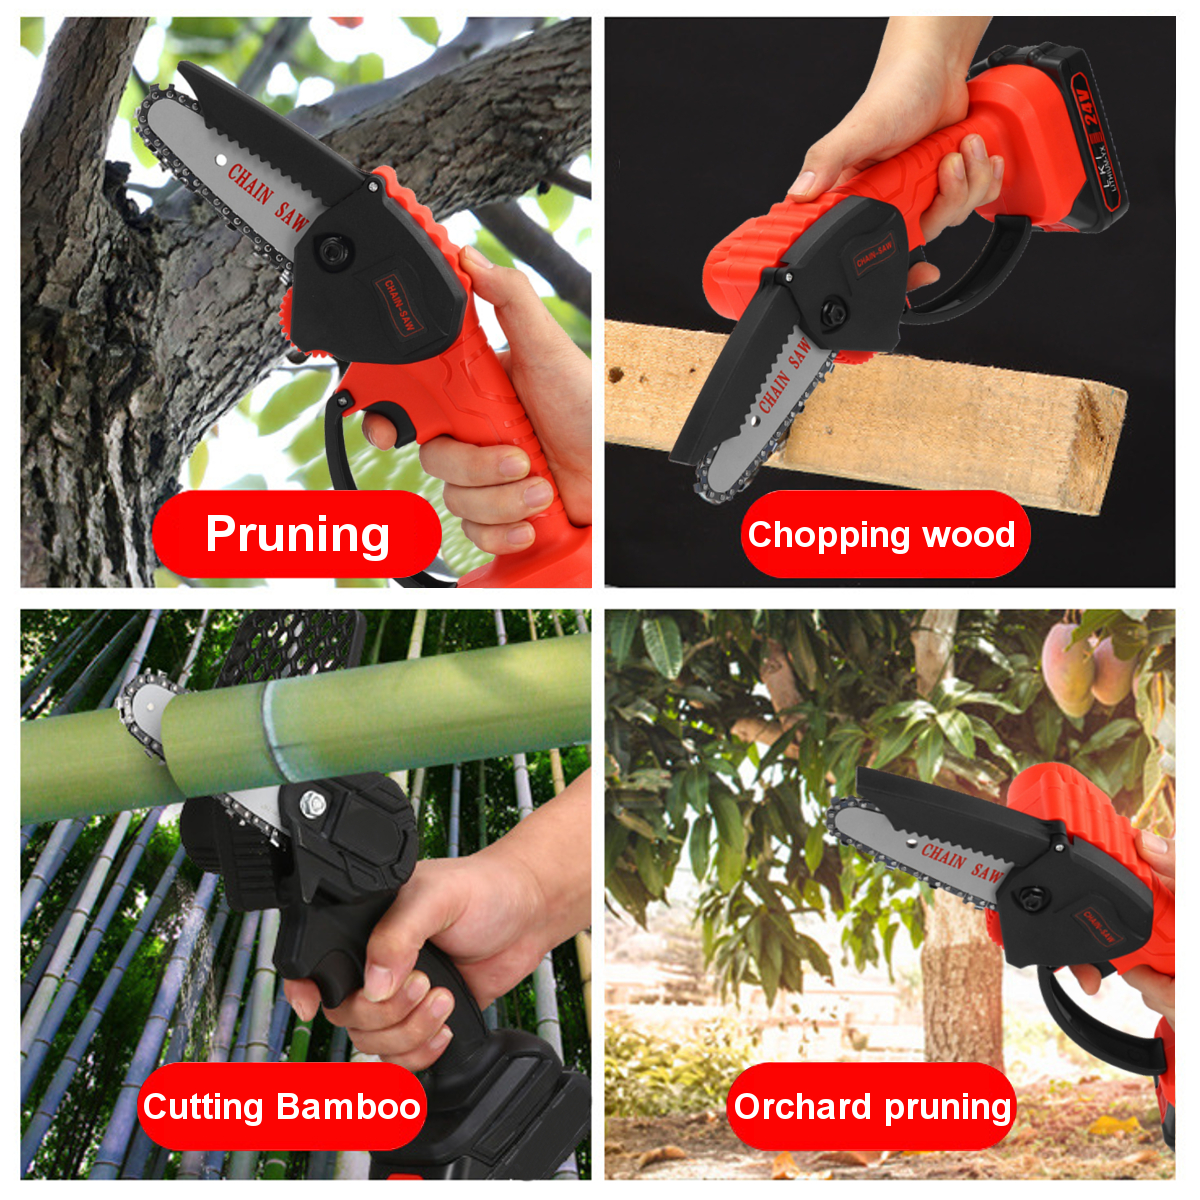 24V-4-Inch-One-Hand-Electric-Chain-Saw-Woodworking-Chainsaw-550W-Cordless-Wood-Saws-Cutter-W-1-or-2--1797421-12